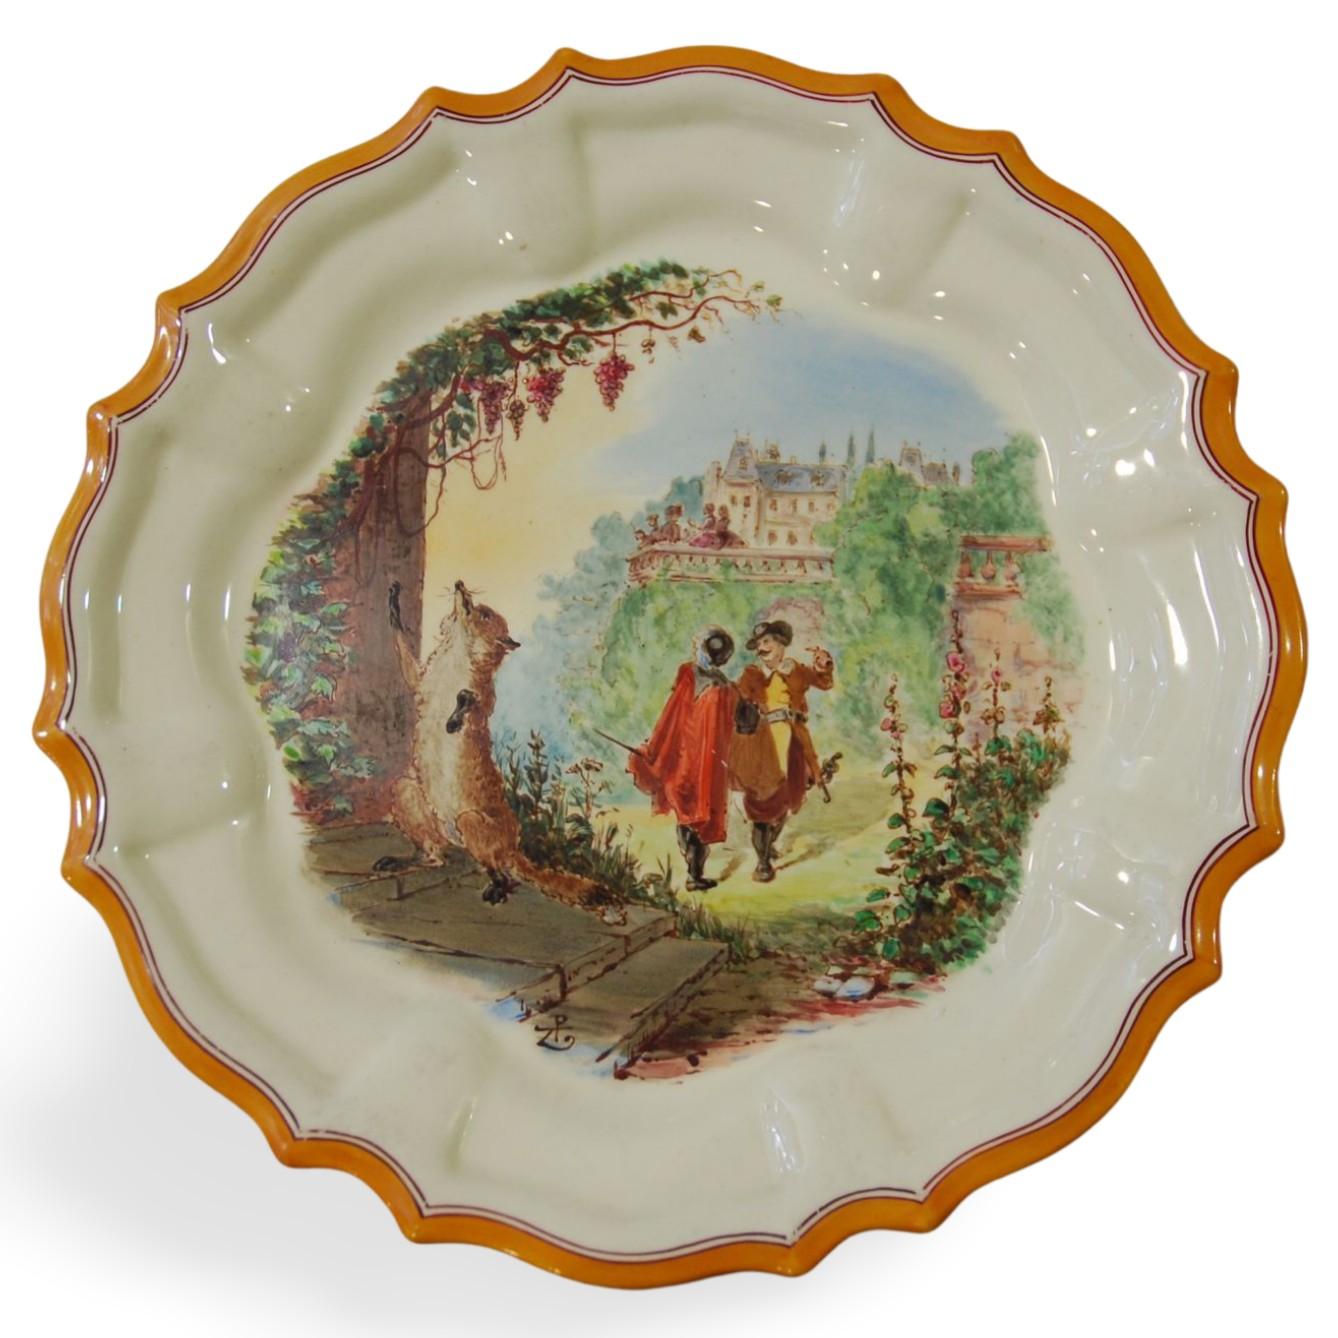 Turned Set of 12 Plates, Aesop Fables, Wedgwood, circa 1860 For Sale